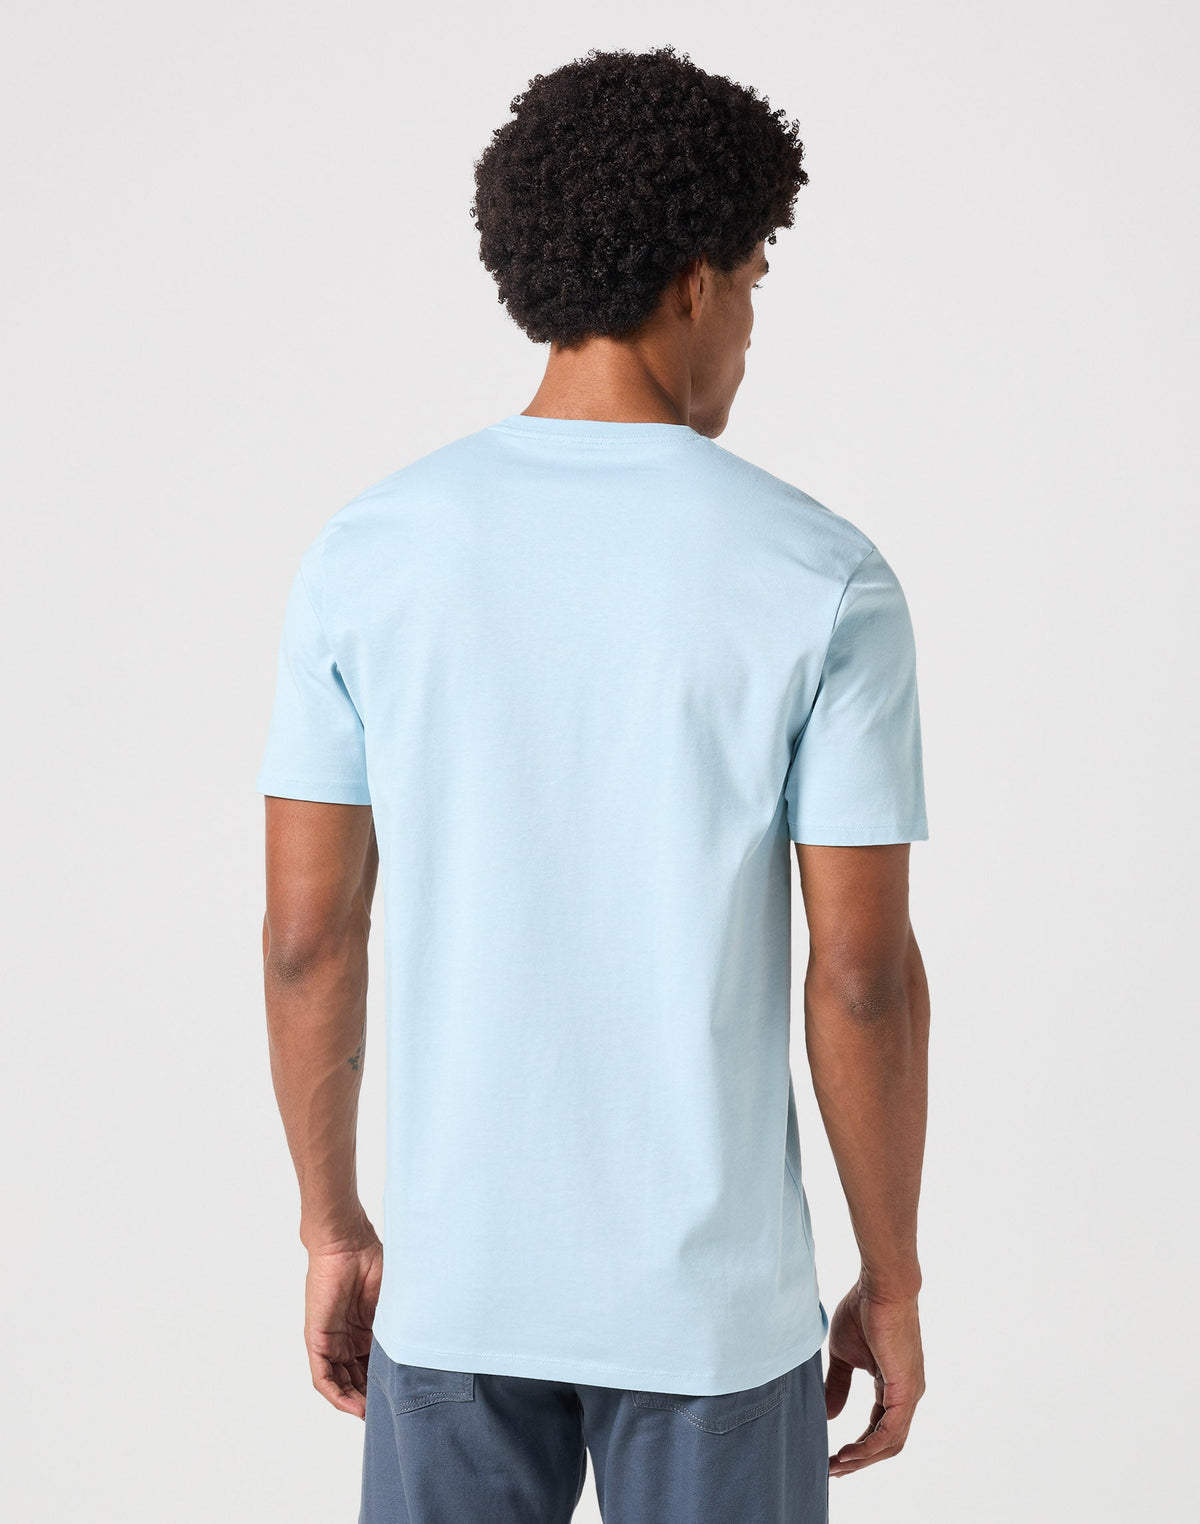 Sign Off Tee in Dream Blue